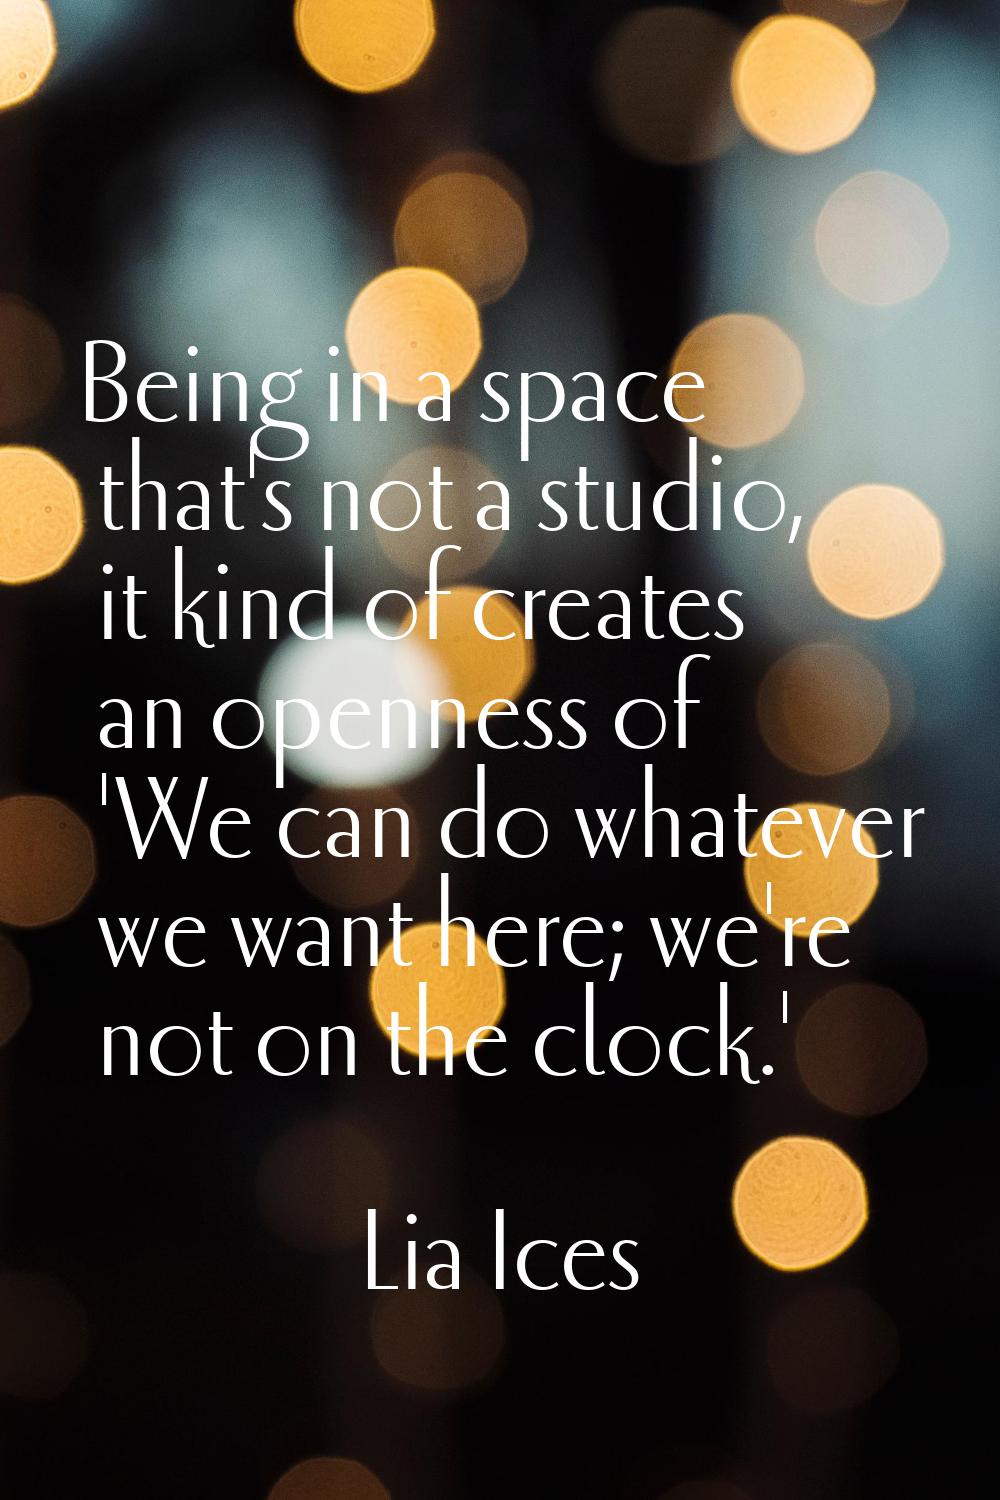 Being in a space that's not a studio, it kind of creates an openness of 'We can do whatever we want